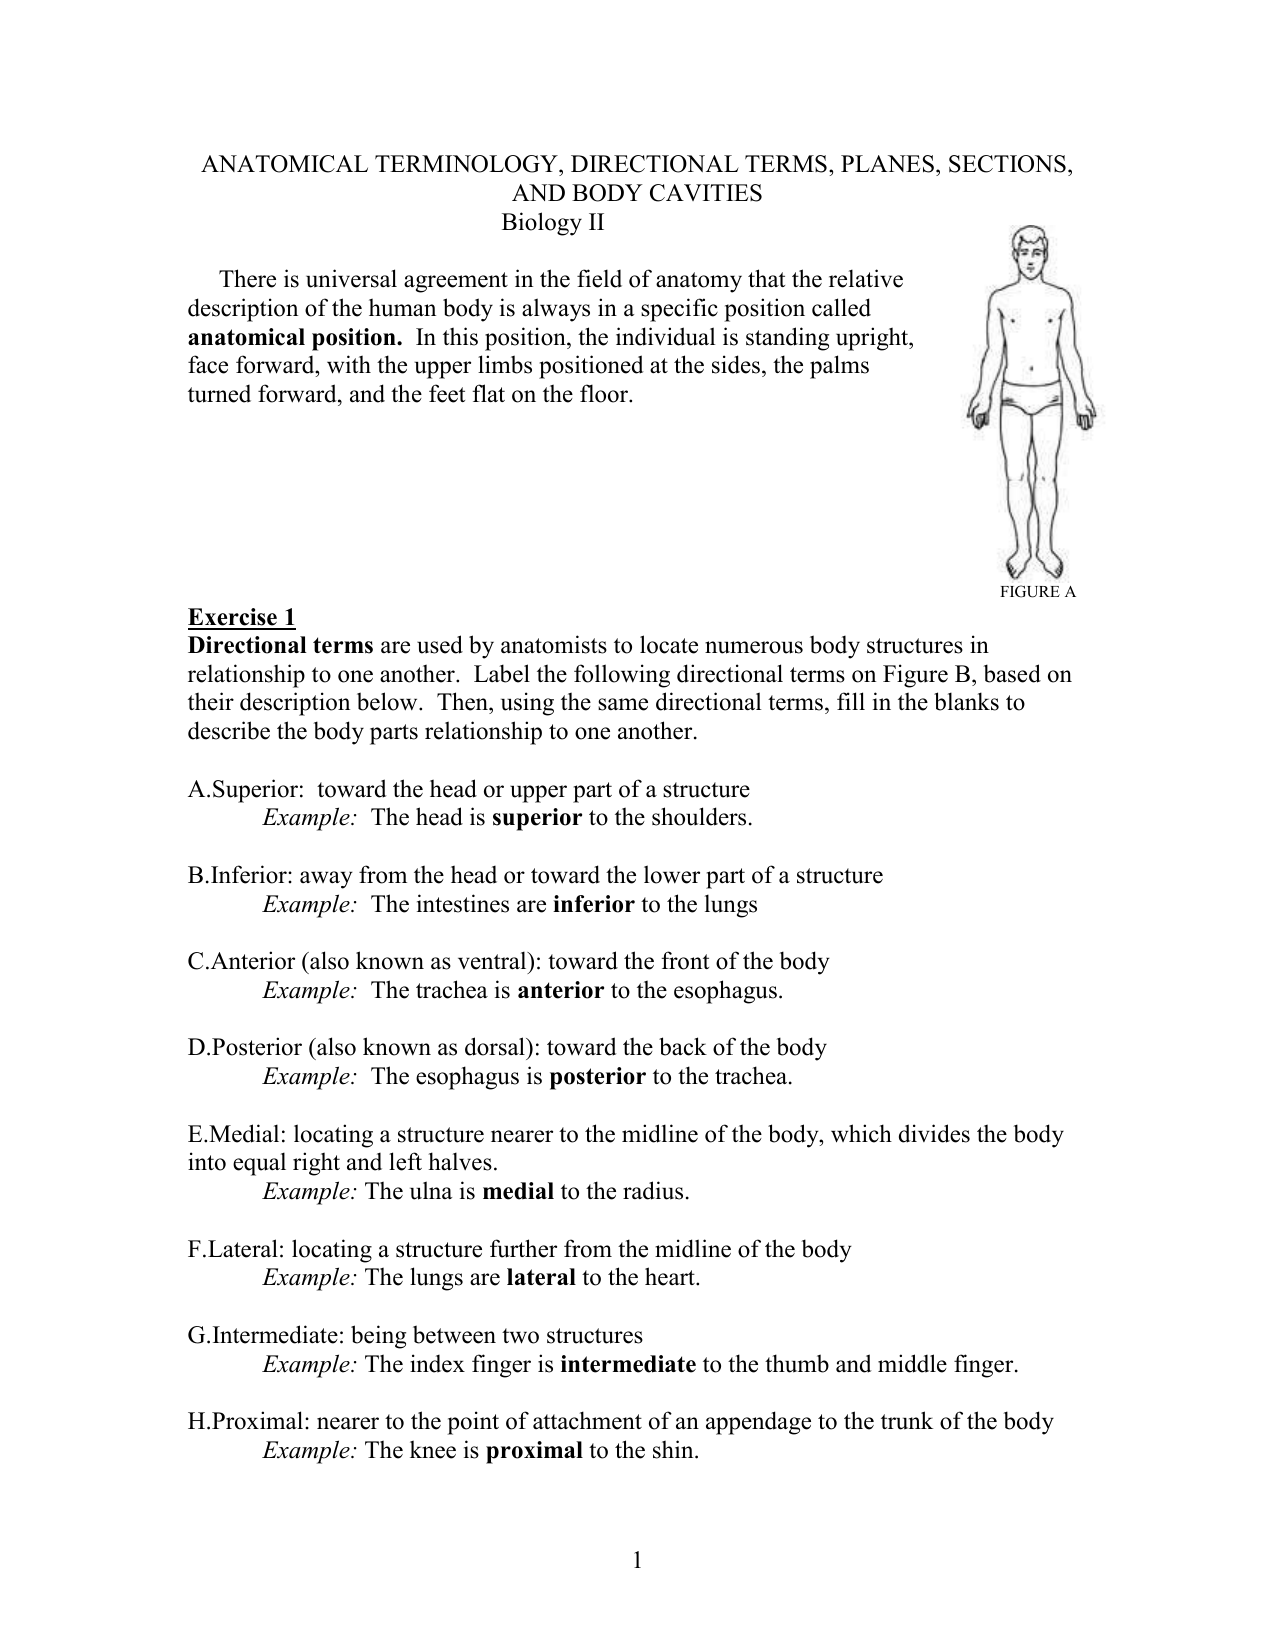 anatomical terminology, directional terms, planes, sections With Anatomical Terms Worksheet Answers